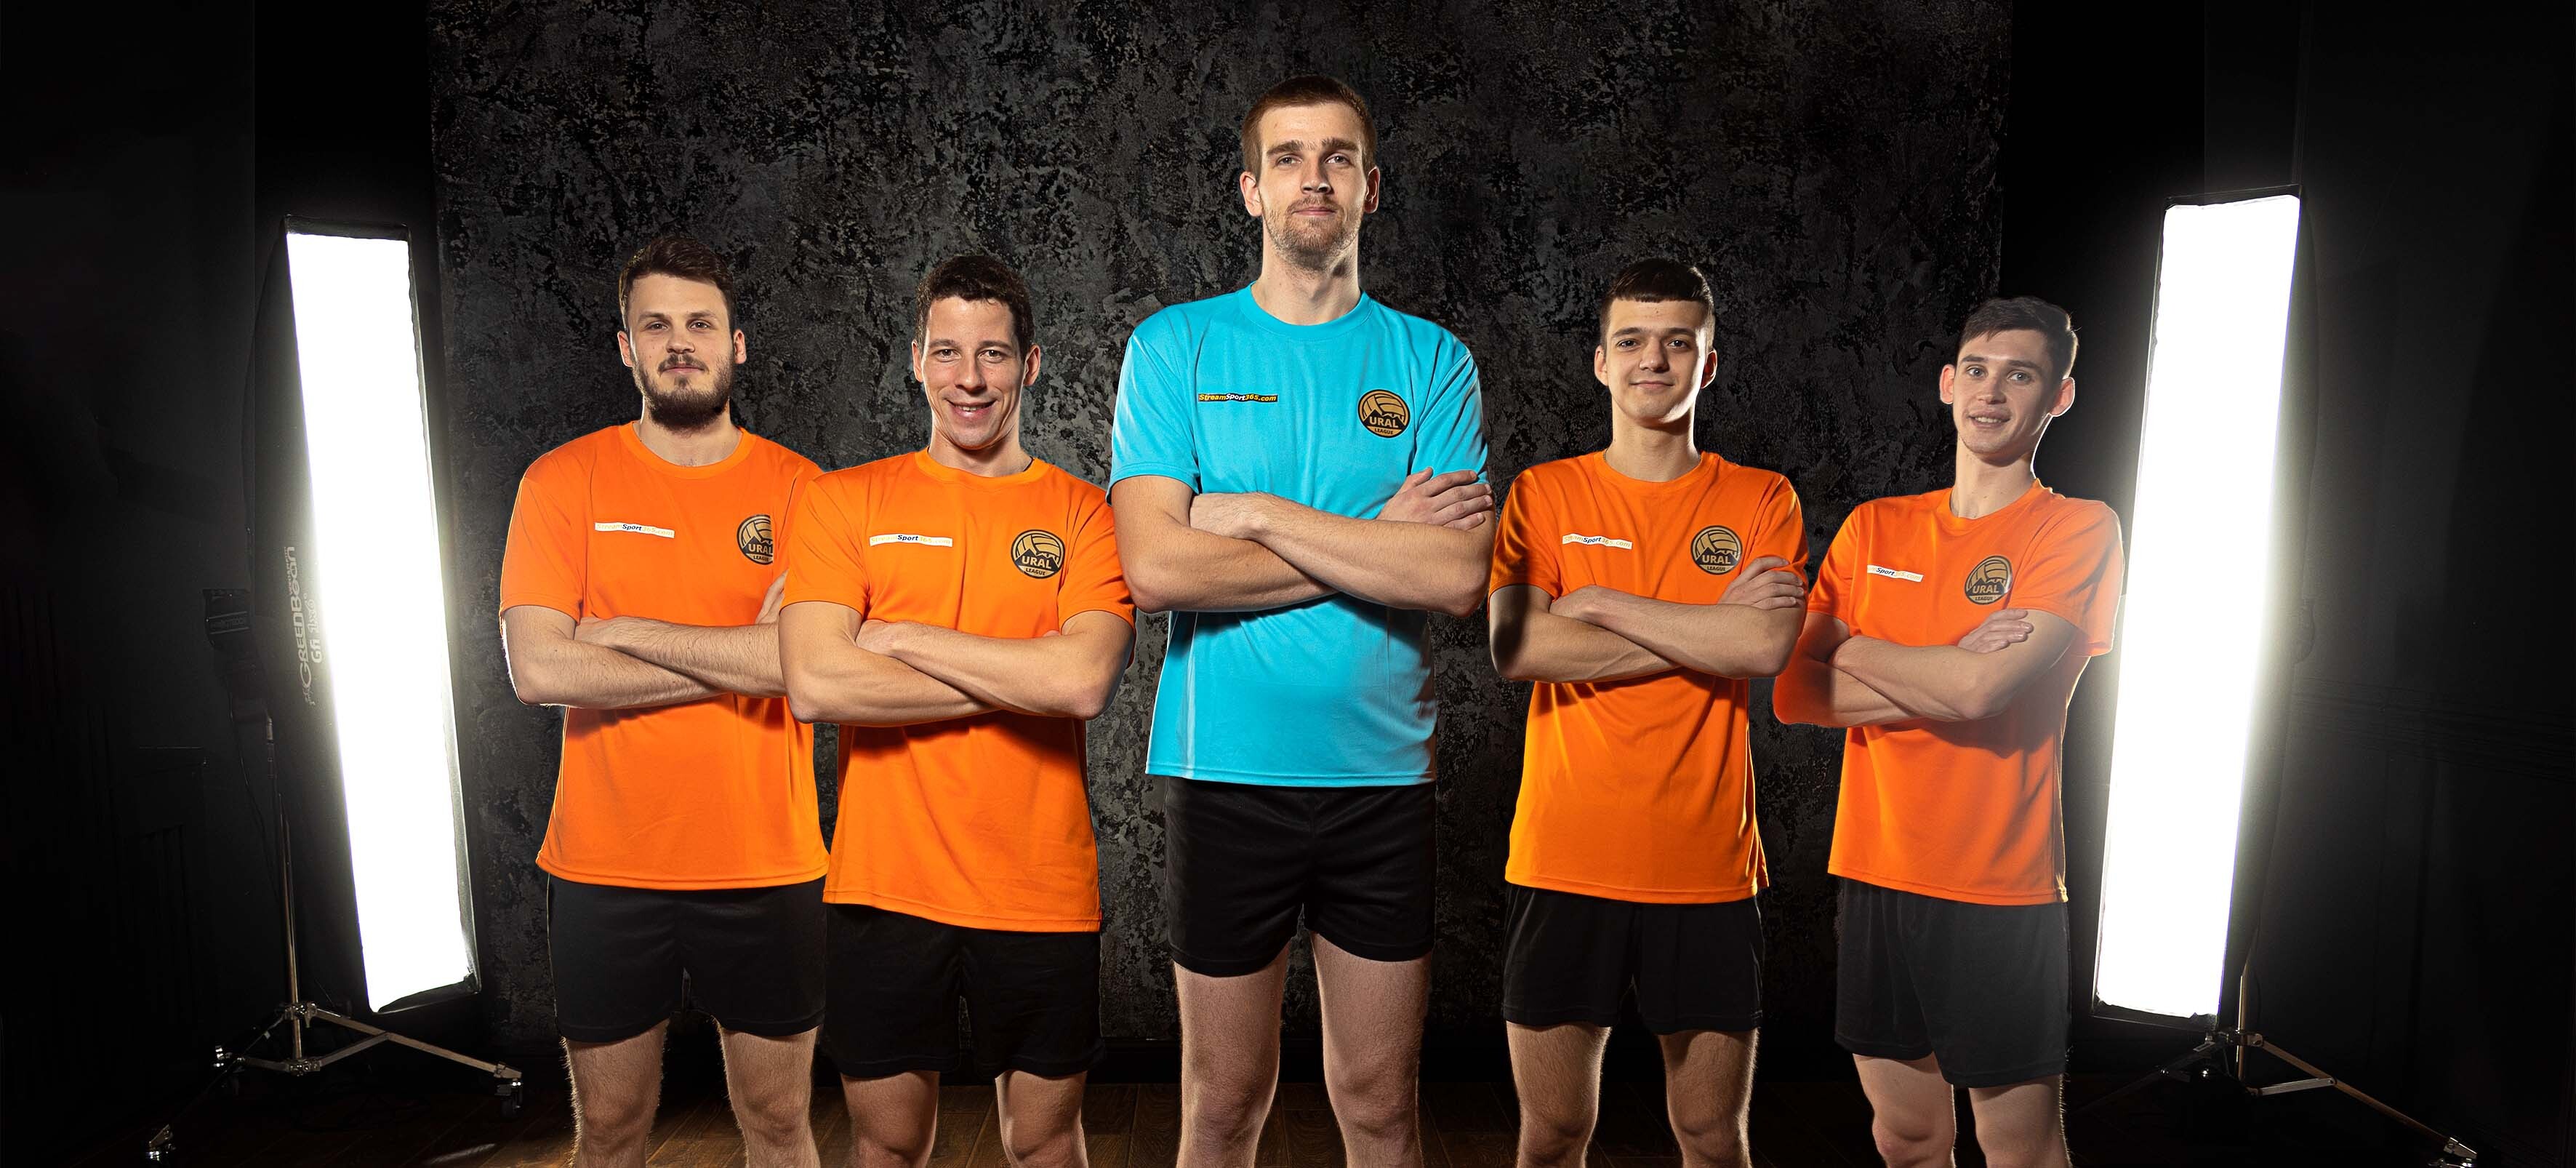 The Ural League roster has been strengthened with 5 new players